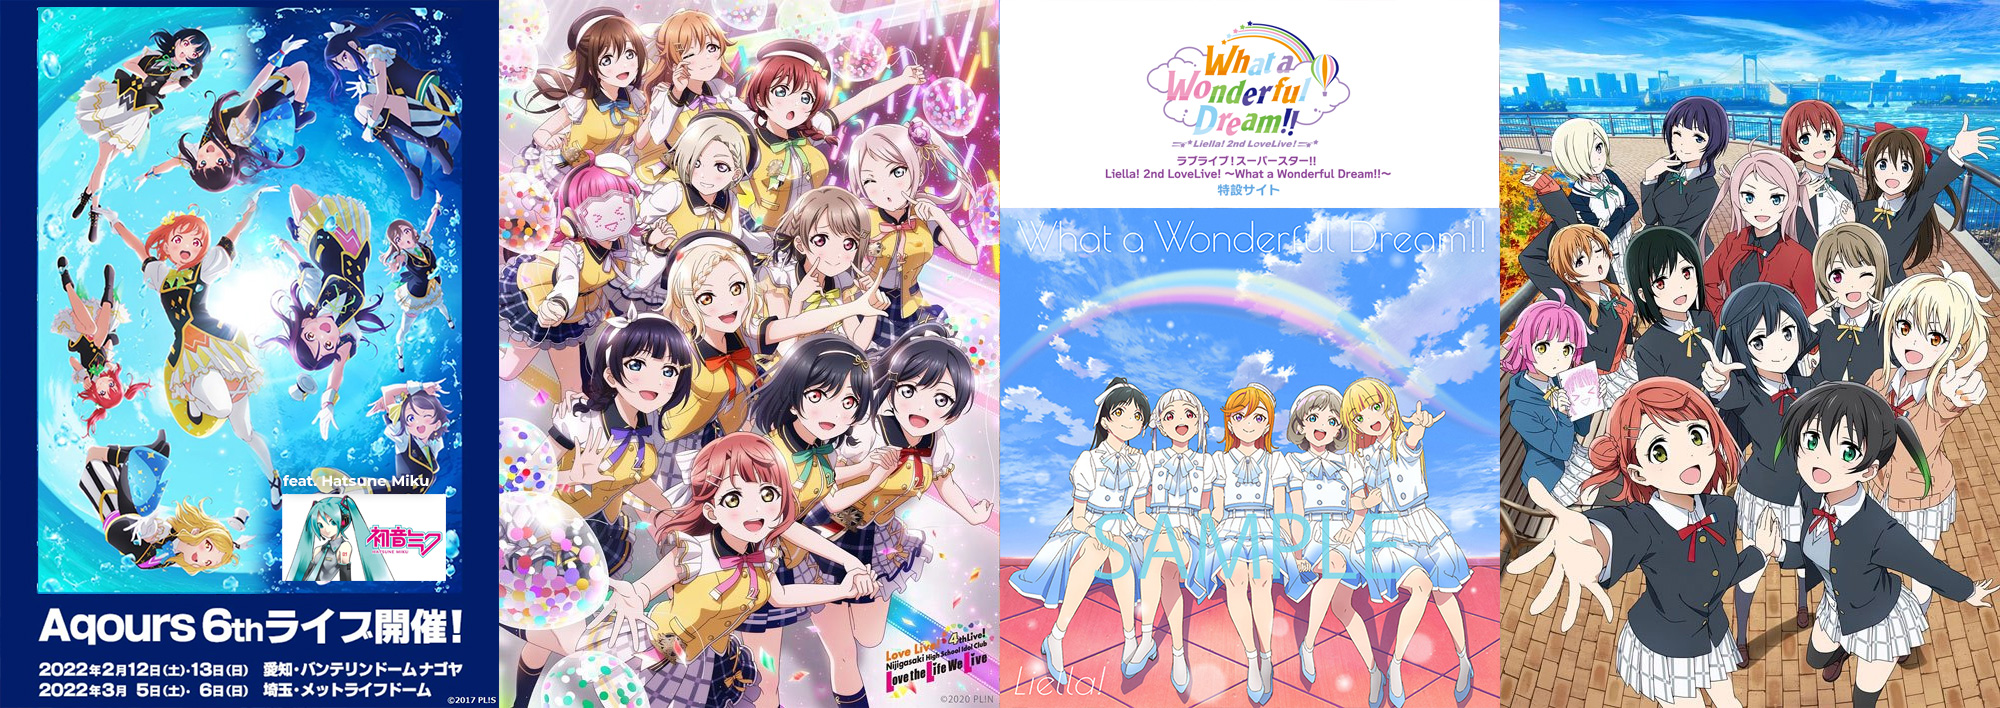 A subreddit dedicated to the Love Live! School Idol Festival game!